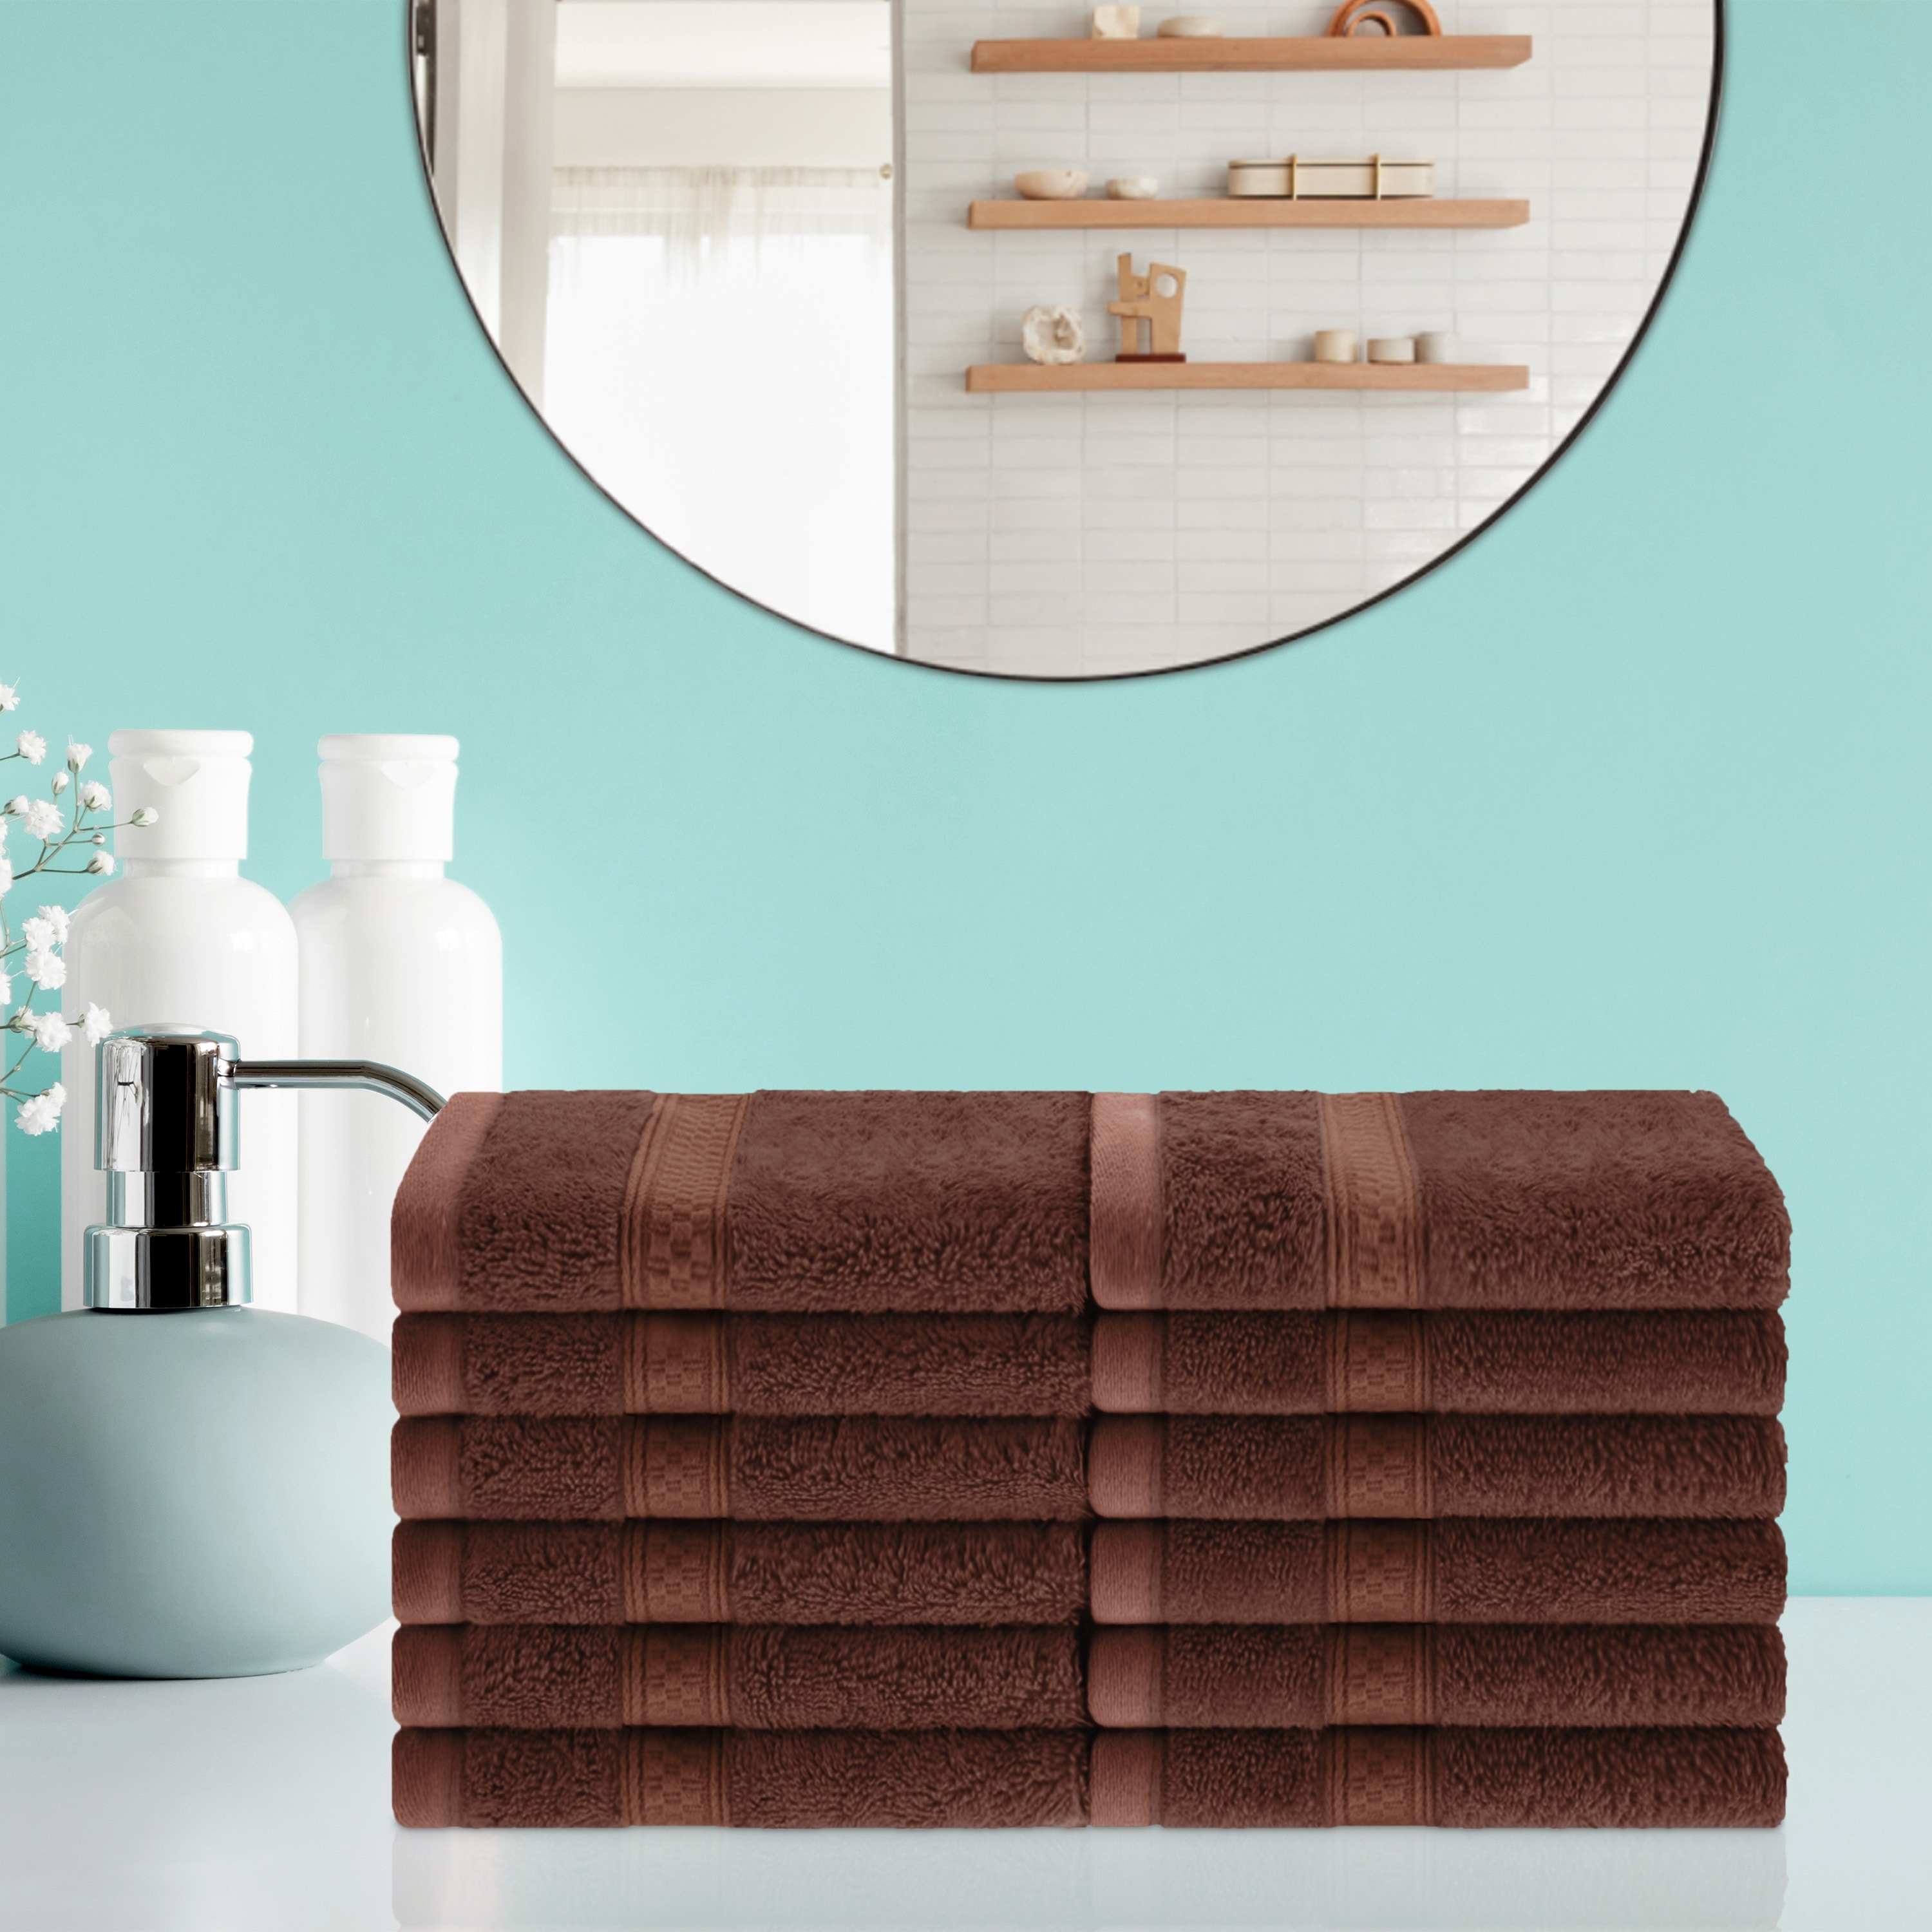 https://ak1.ostkcdn.com/images/products/is/images/direct/1ab12880bc9565cefdbd675b8d483ff16a336e53/Miranda-Haus-Rayon-from-Bamboo--Cotton-Face-Towel-%28Set-of-12%29.jpg